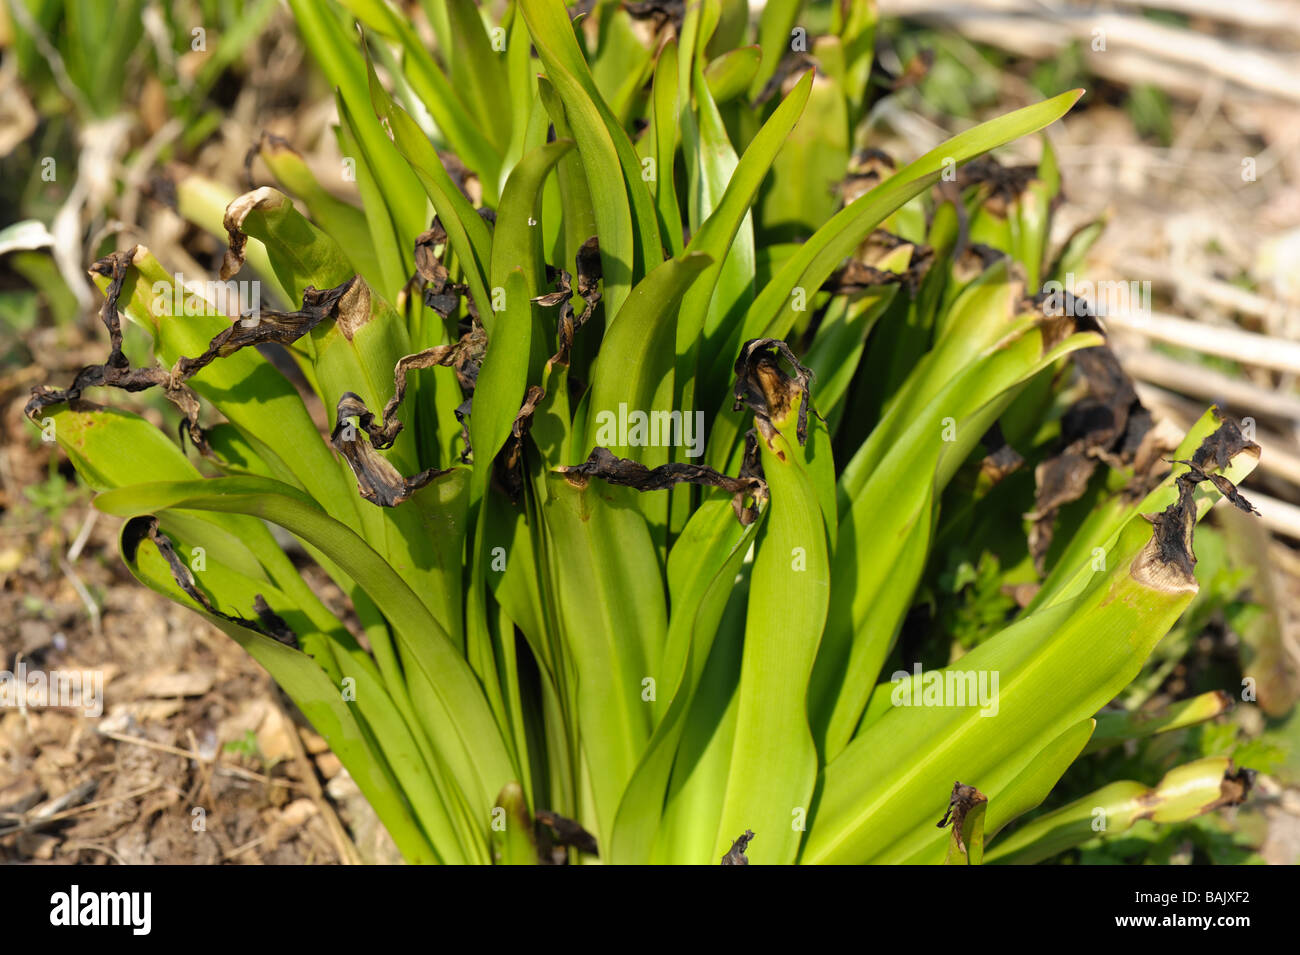 Frost damage to the leaf tips of Agapanthus plants Stock Photo